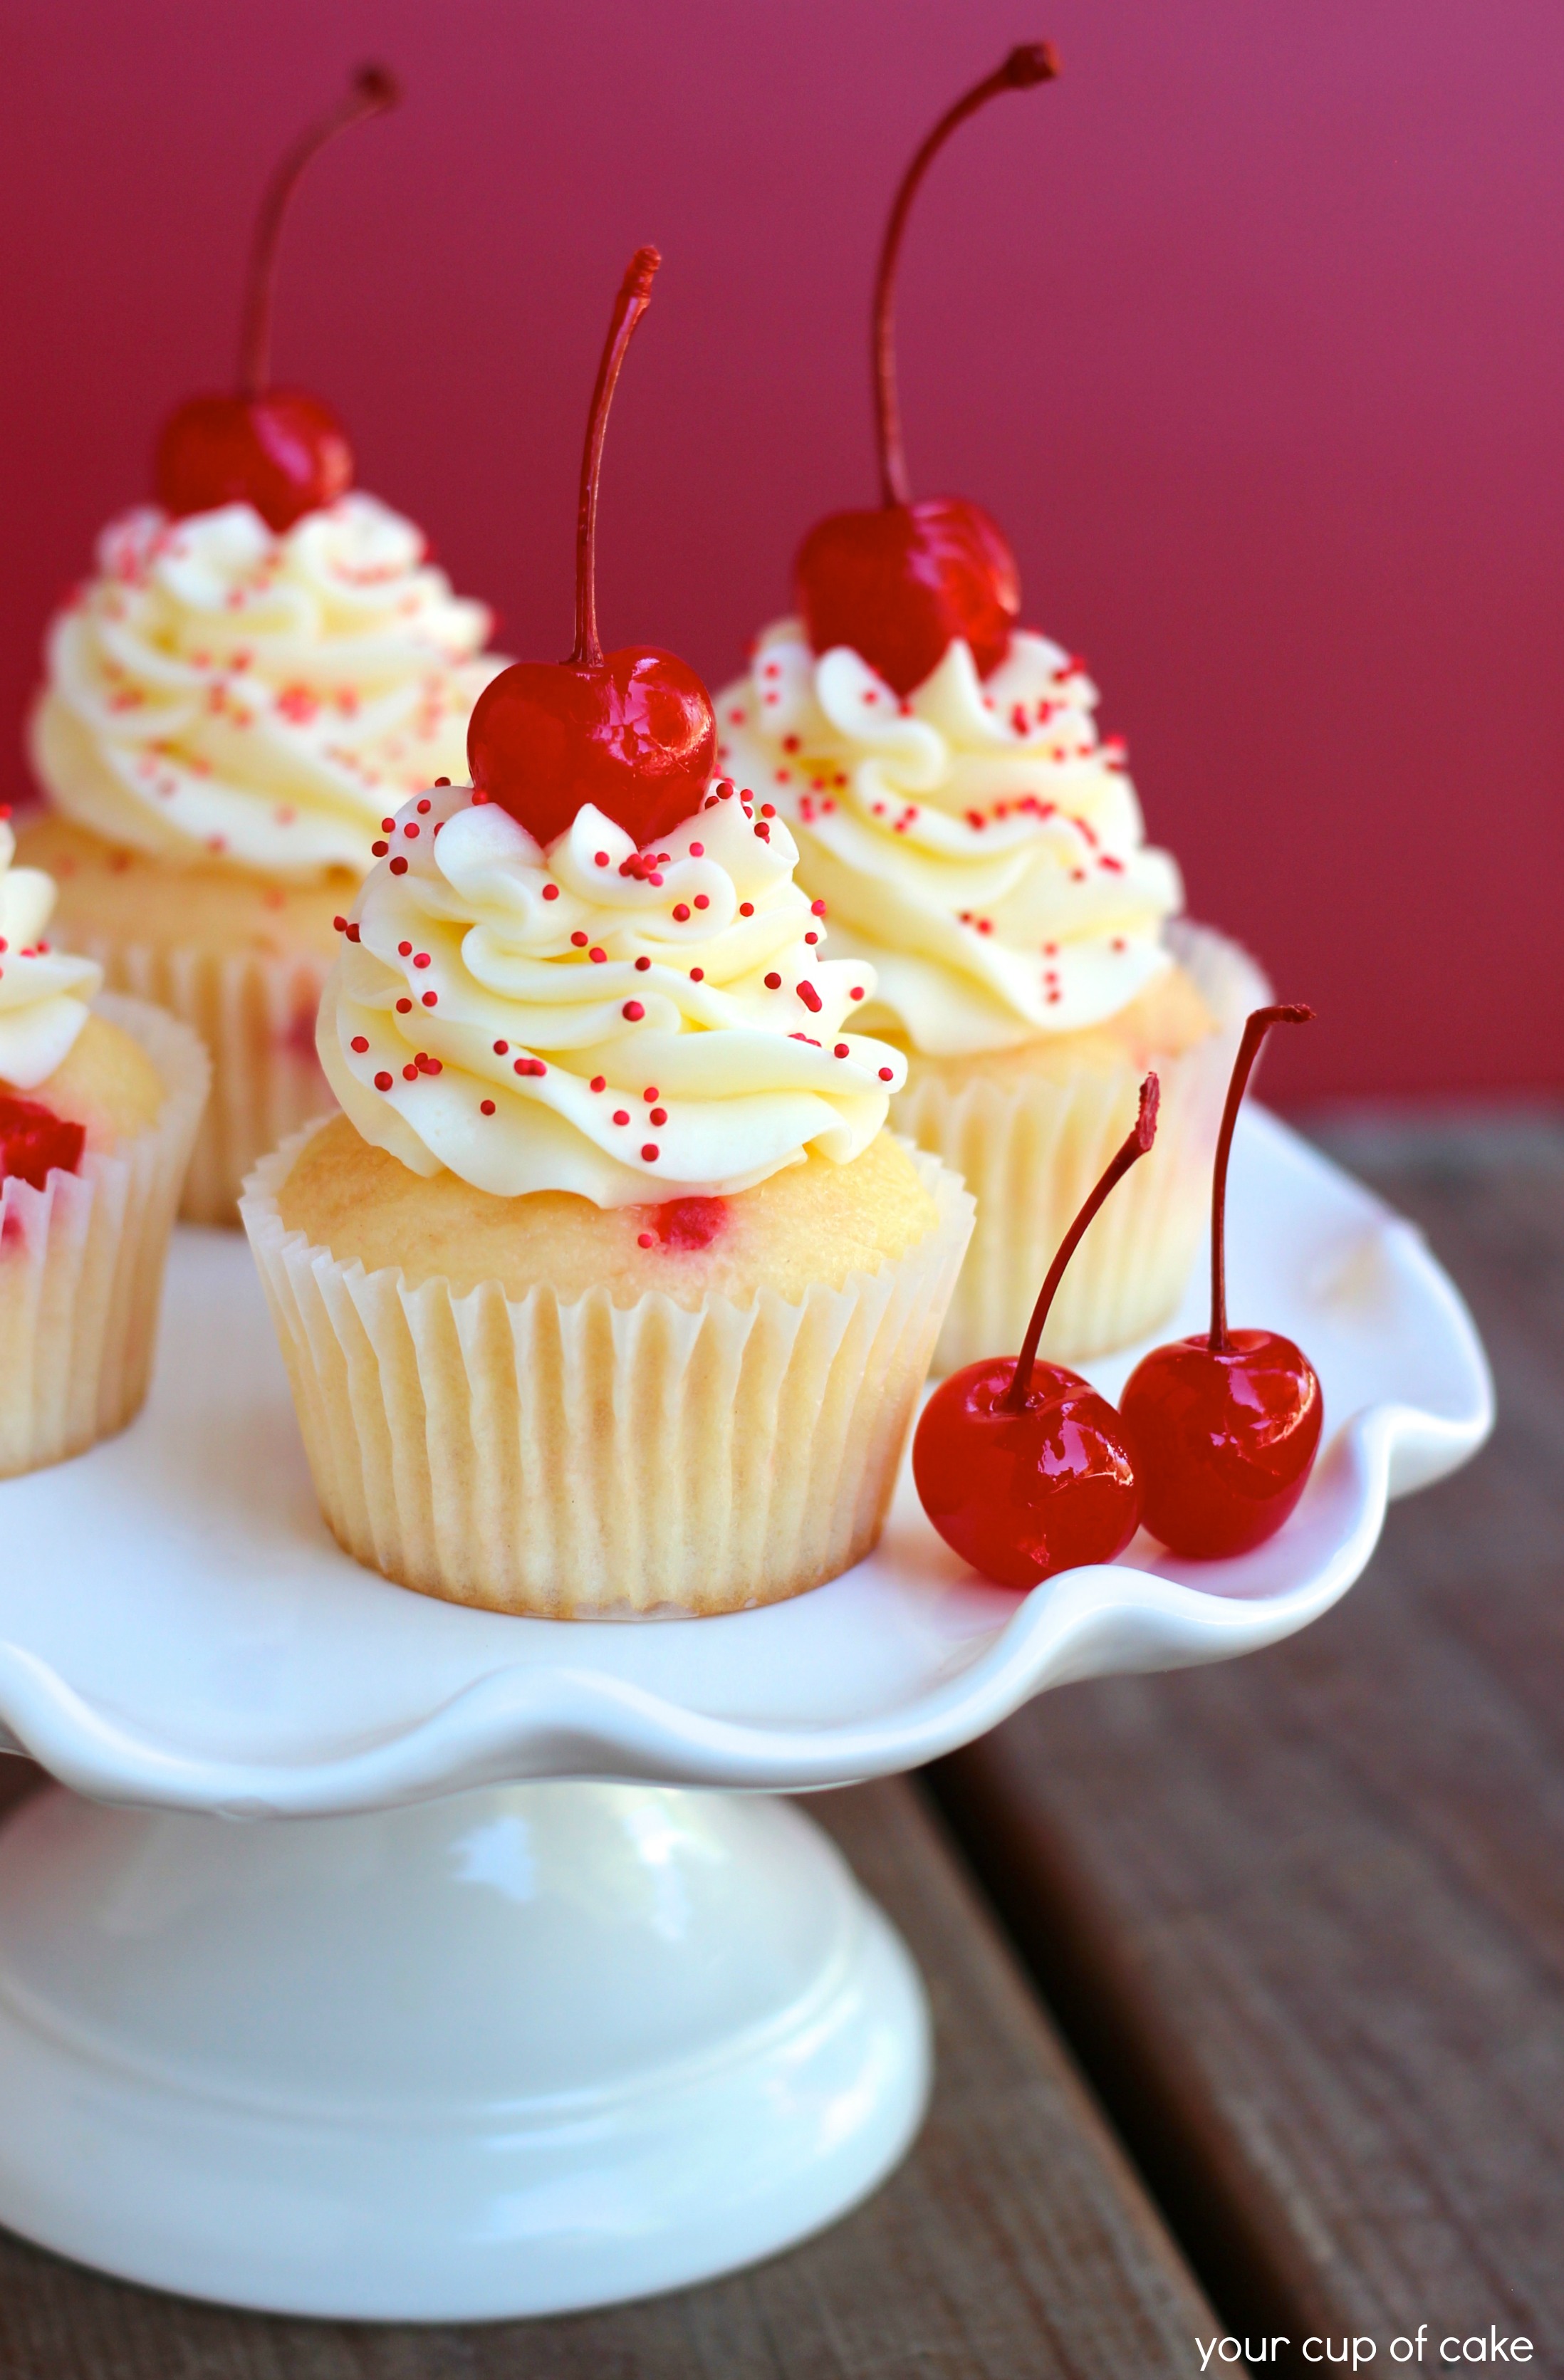 Amazing Cupcakes Wallpapers, - Cherry Cupcakes , HD Wallpaper & Backgrounds